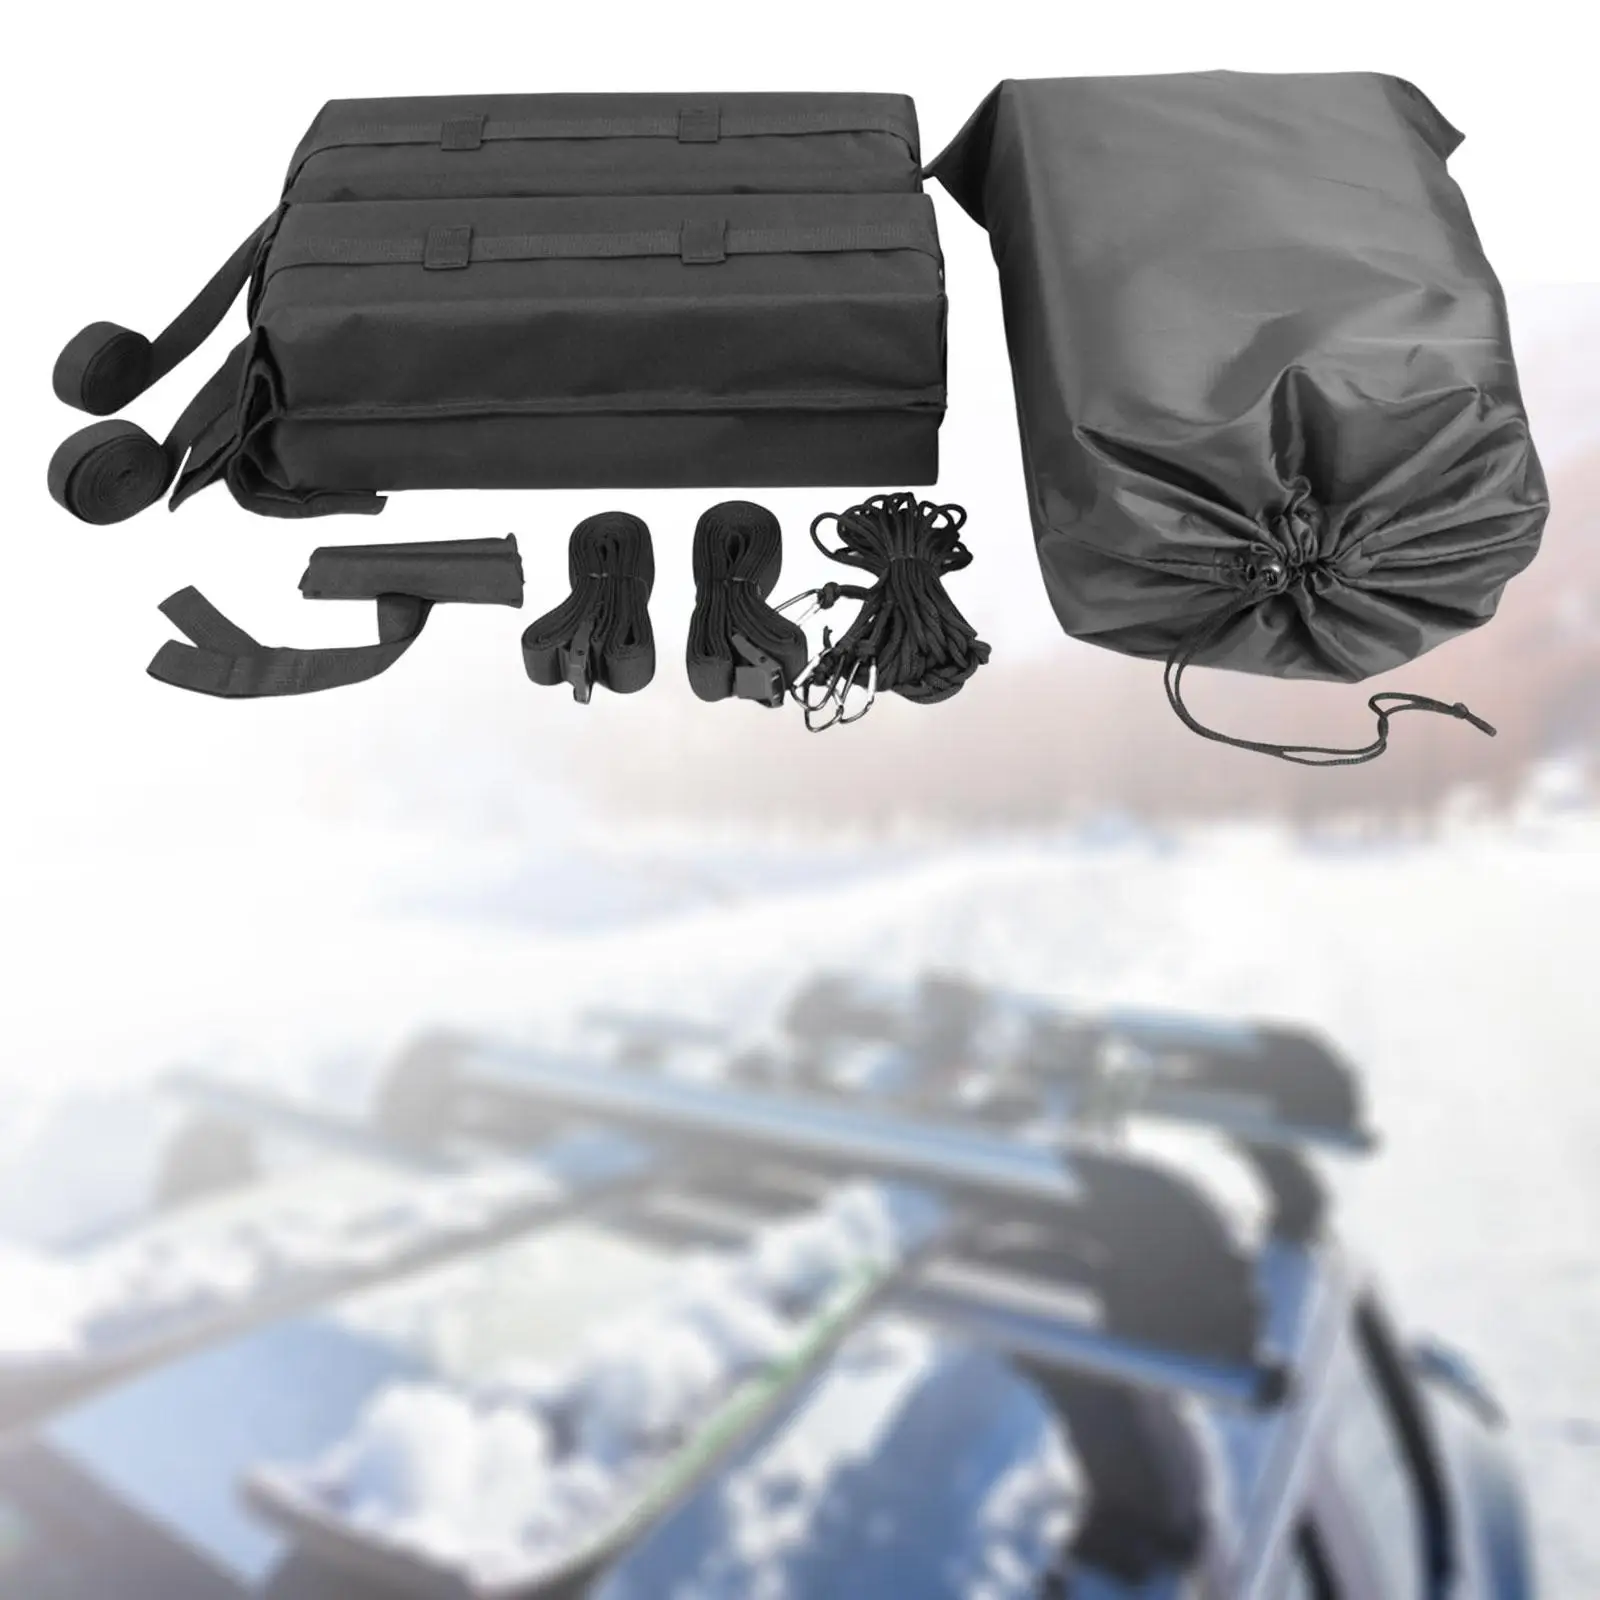 Soft Roof Rack Pads Space Saving Durable High Performance Surfboard Racks Accessory with Storage Bag for Paddle Board Kayak